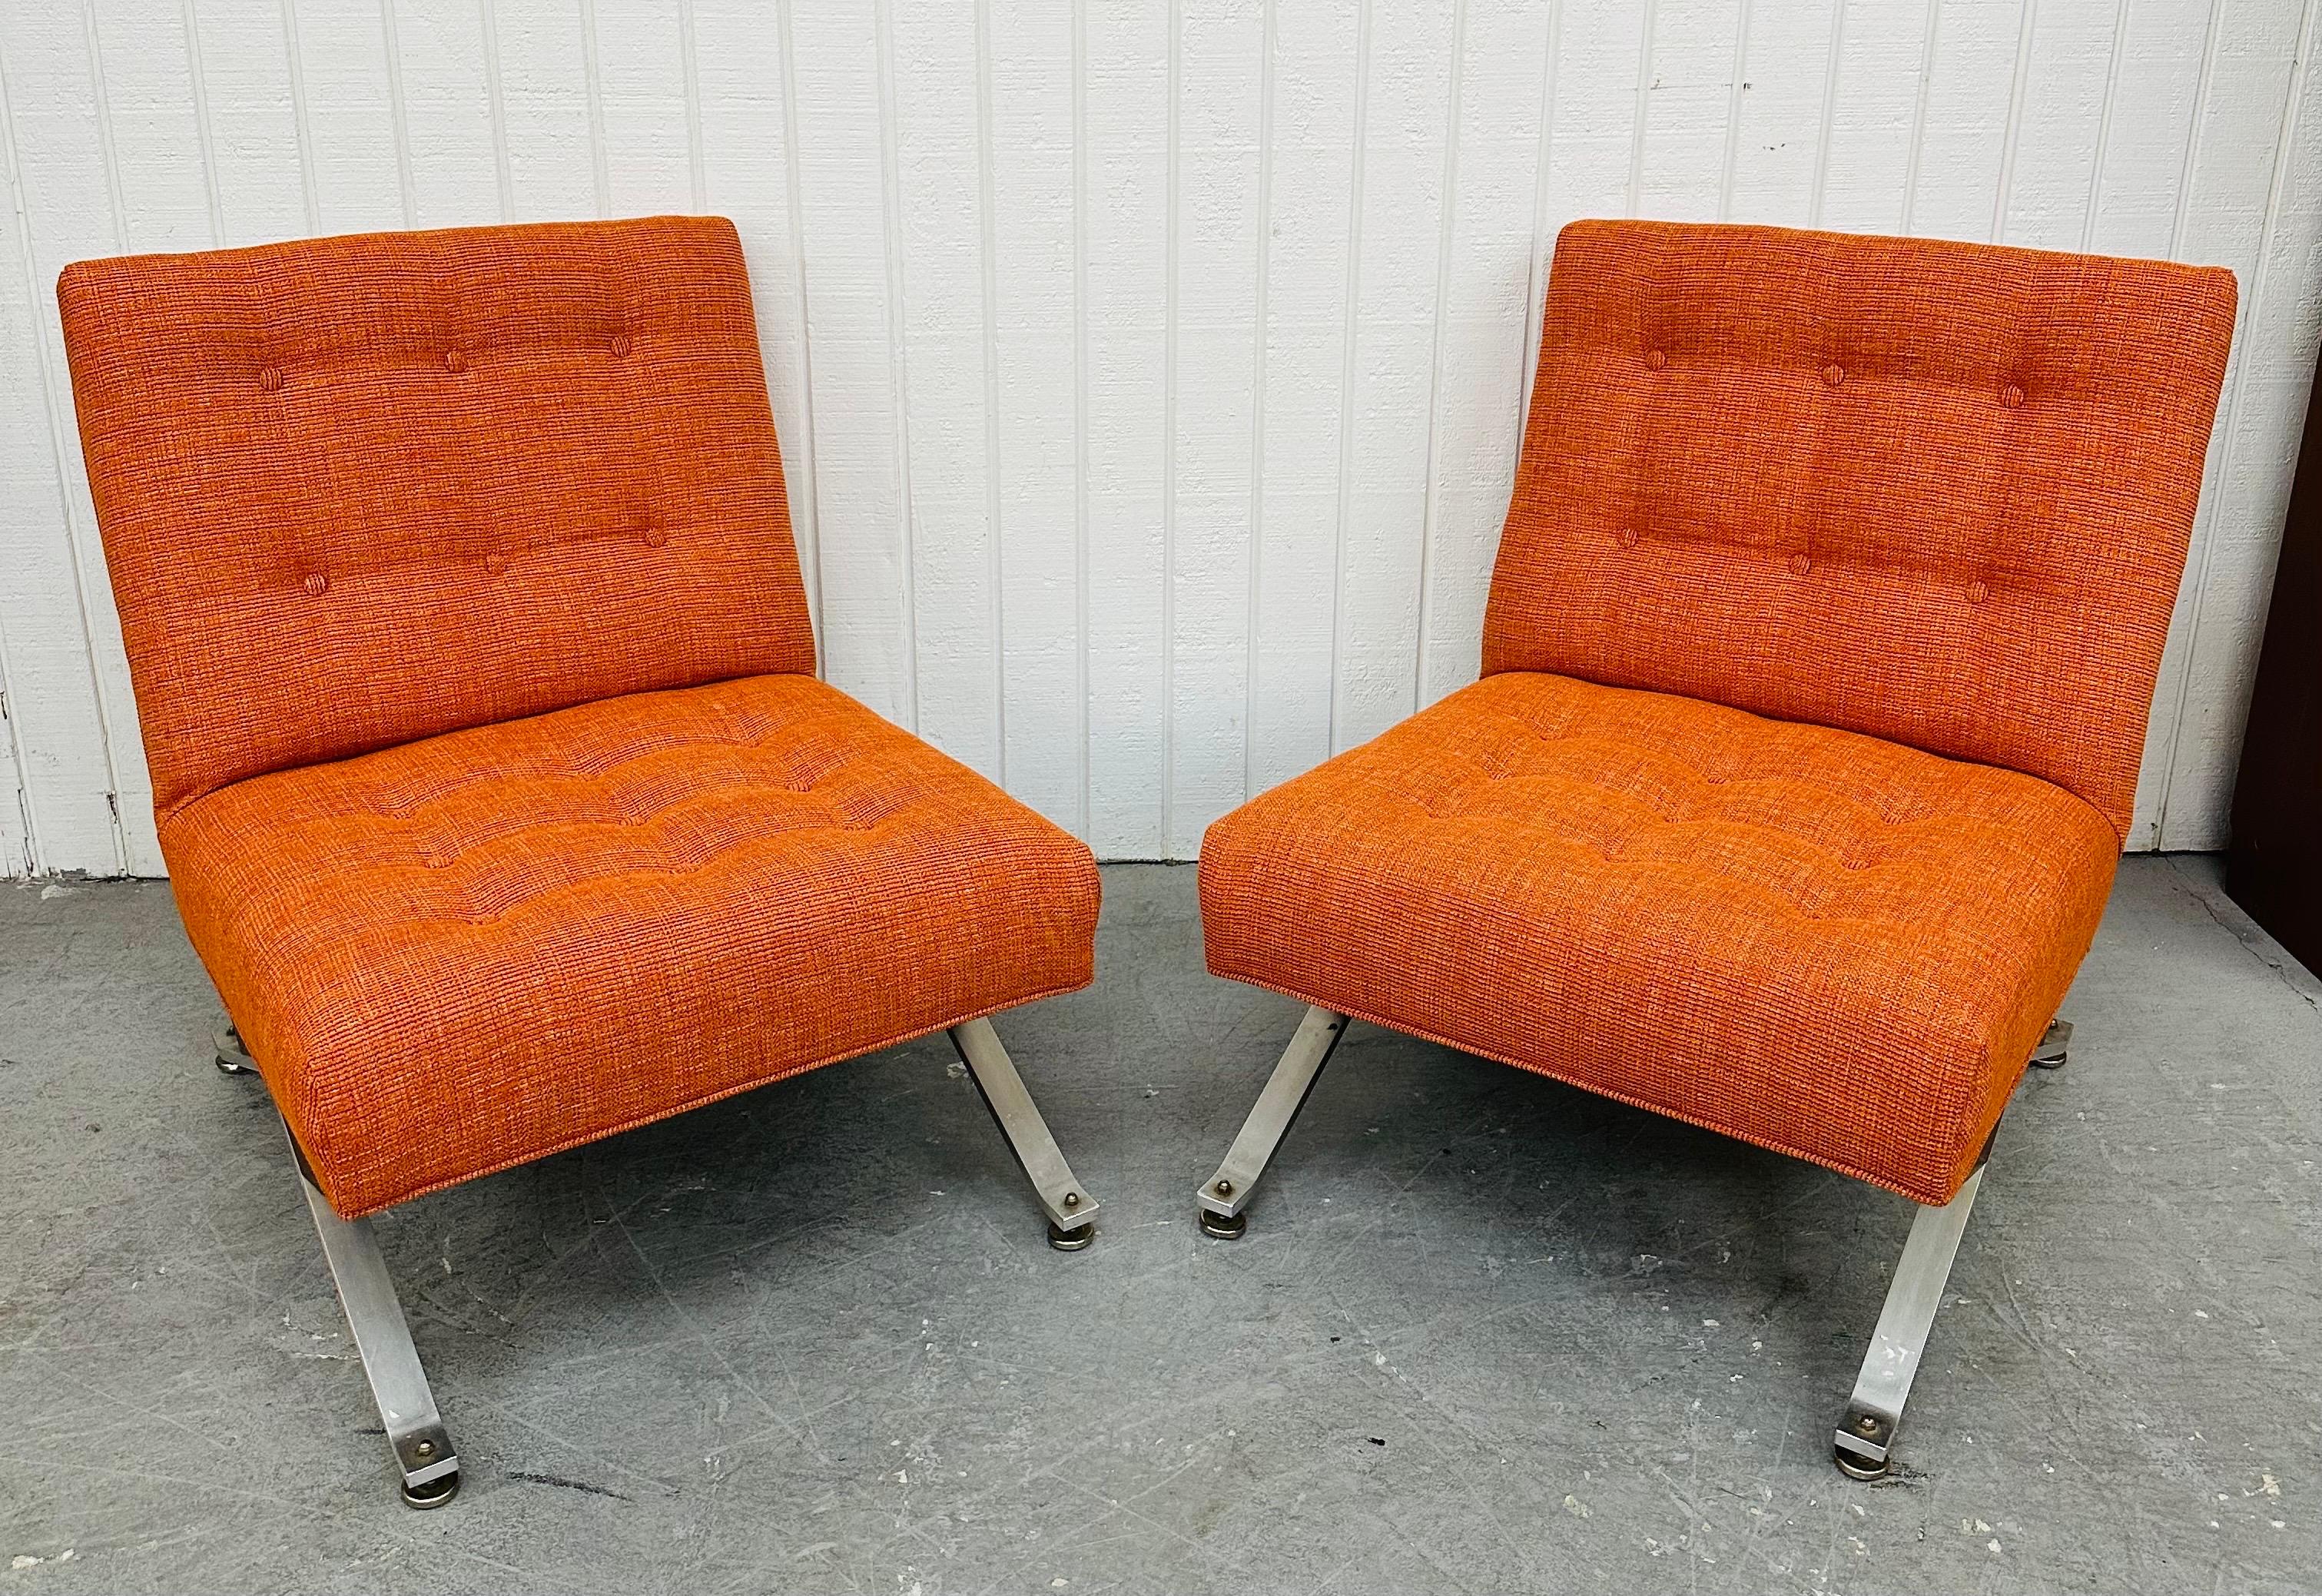 This listing is for a pair of Mid-Century Modern Orange Slipper Chairs. Featuring an armless slipper design, bent aluminum legs, walnut accents on each side, and newly re-done orange upholstery. This is an exceptional combination of quality and